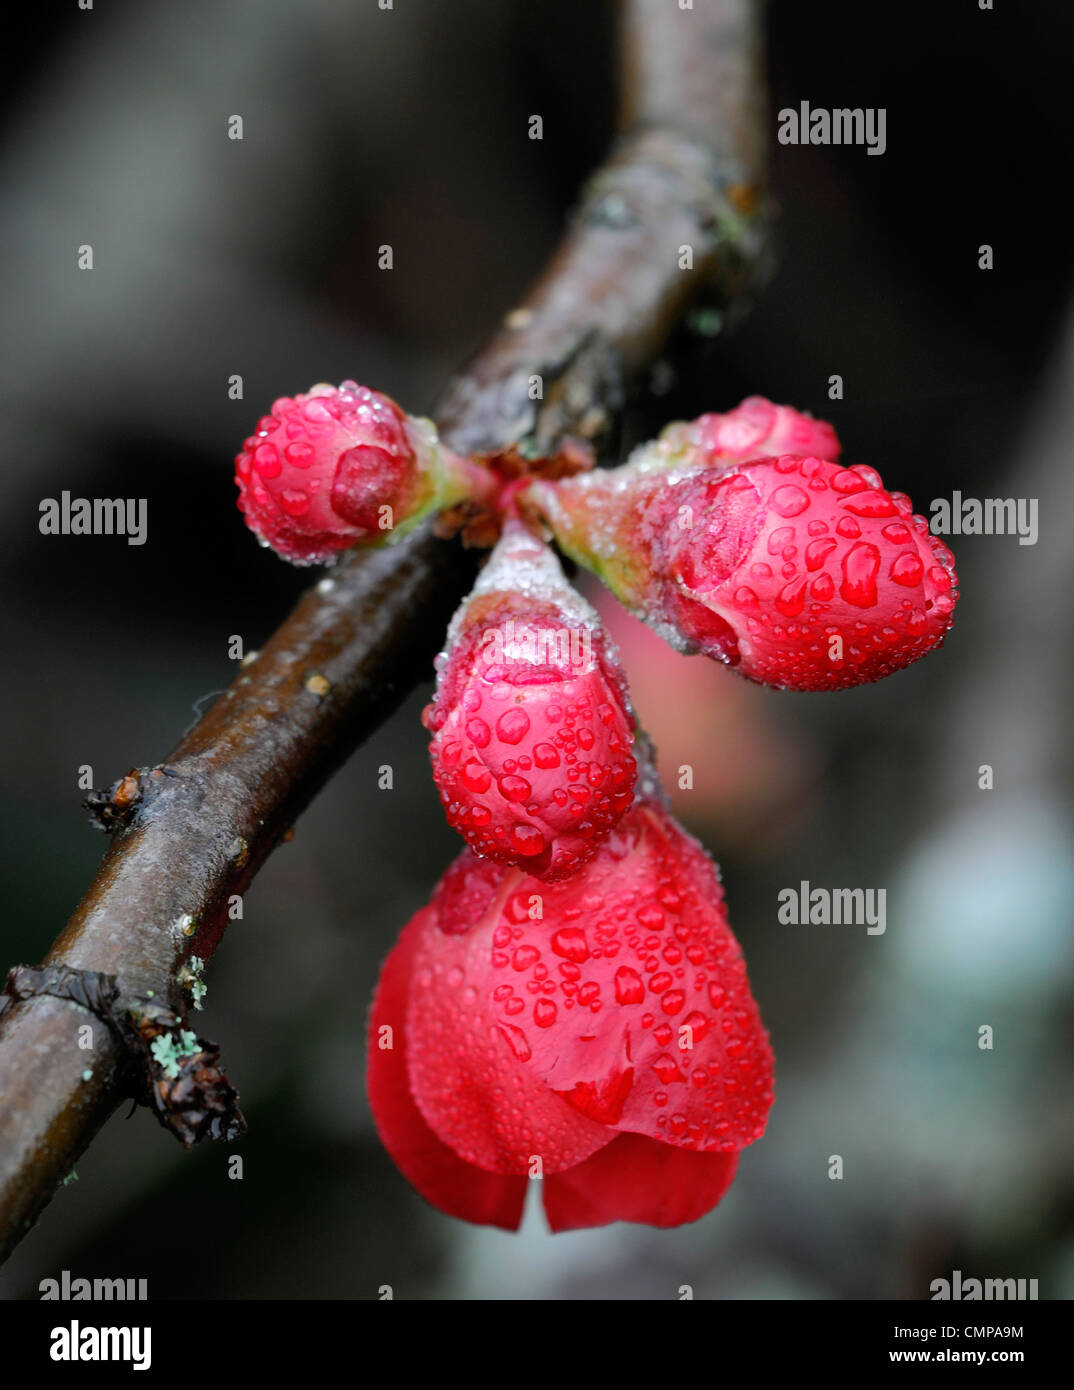 chaenomeles x superba flowering quince spring closeup selective focus plant portraits red flowers blooms shrubs frost damage Stock Photo